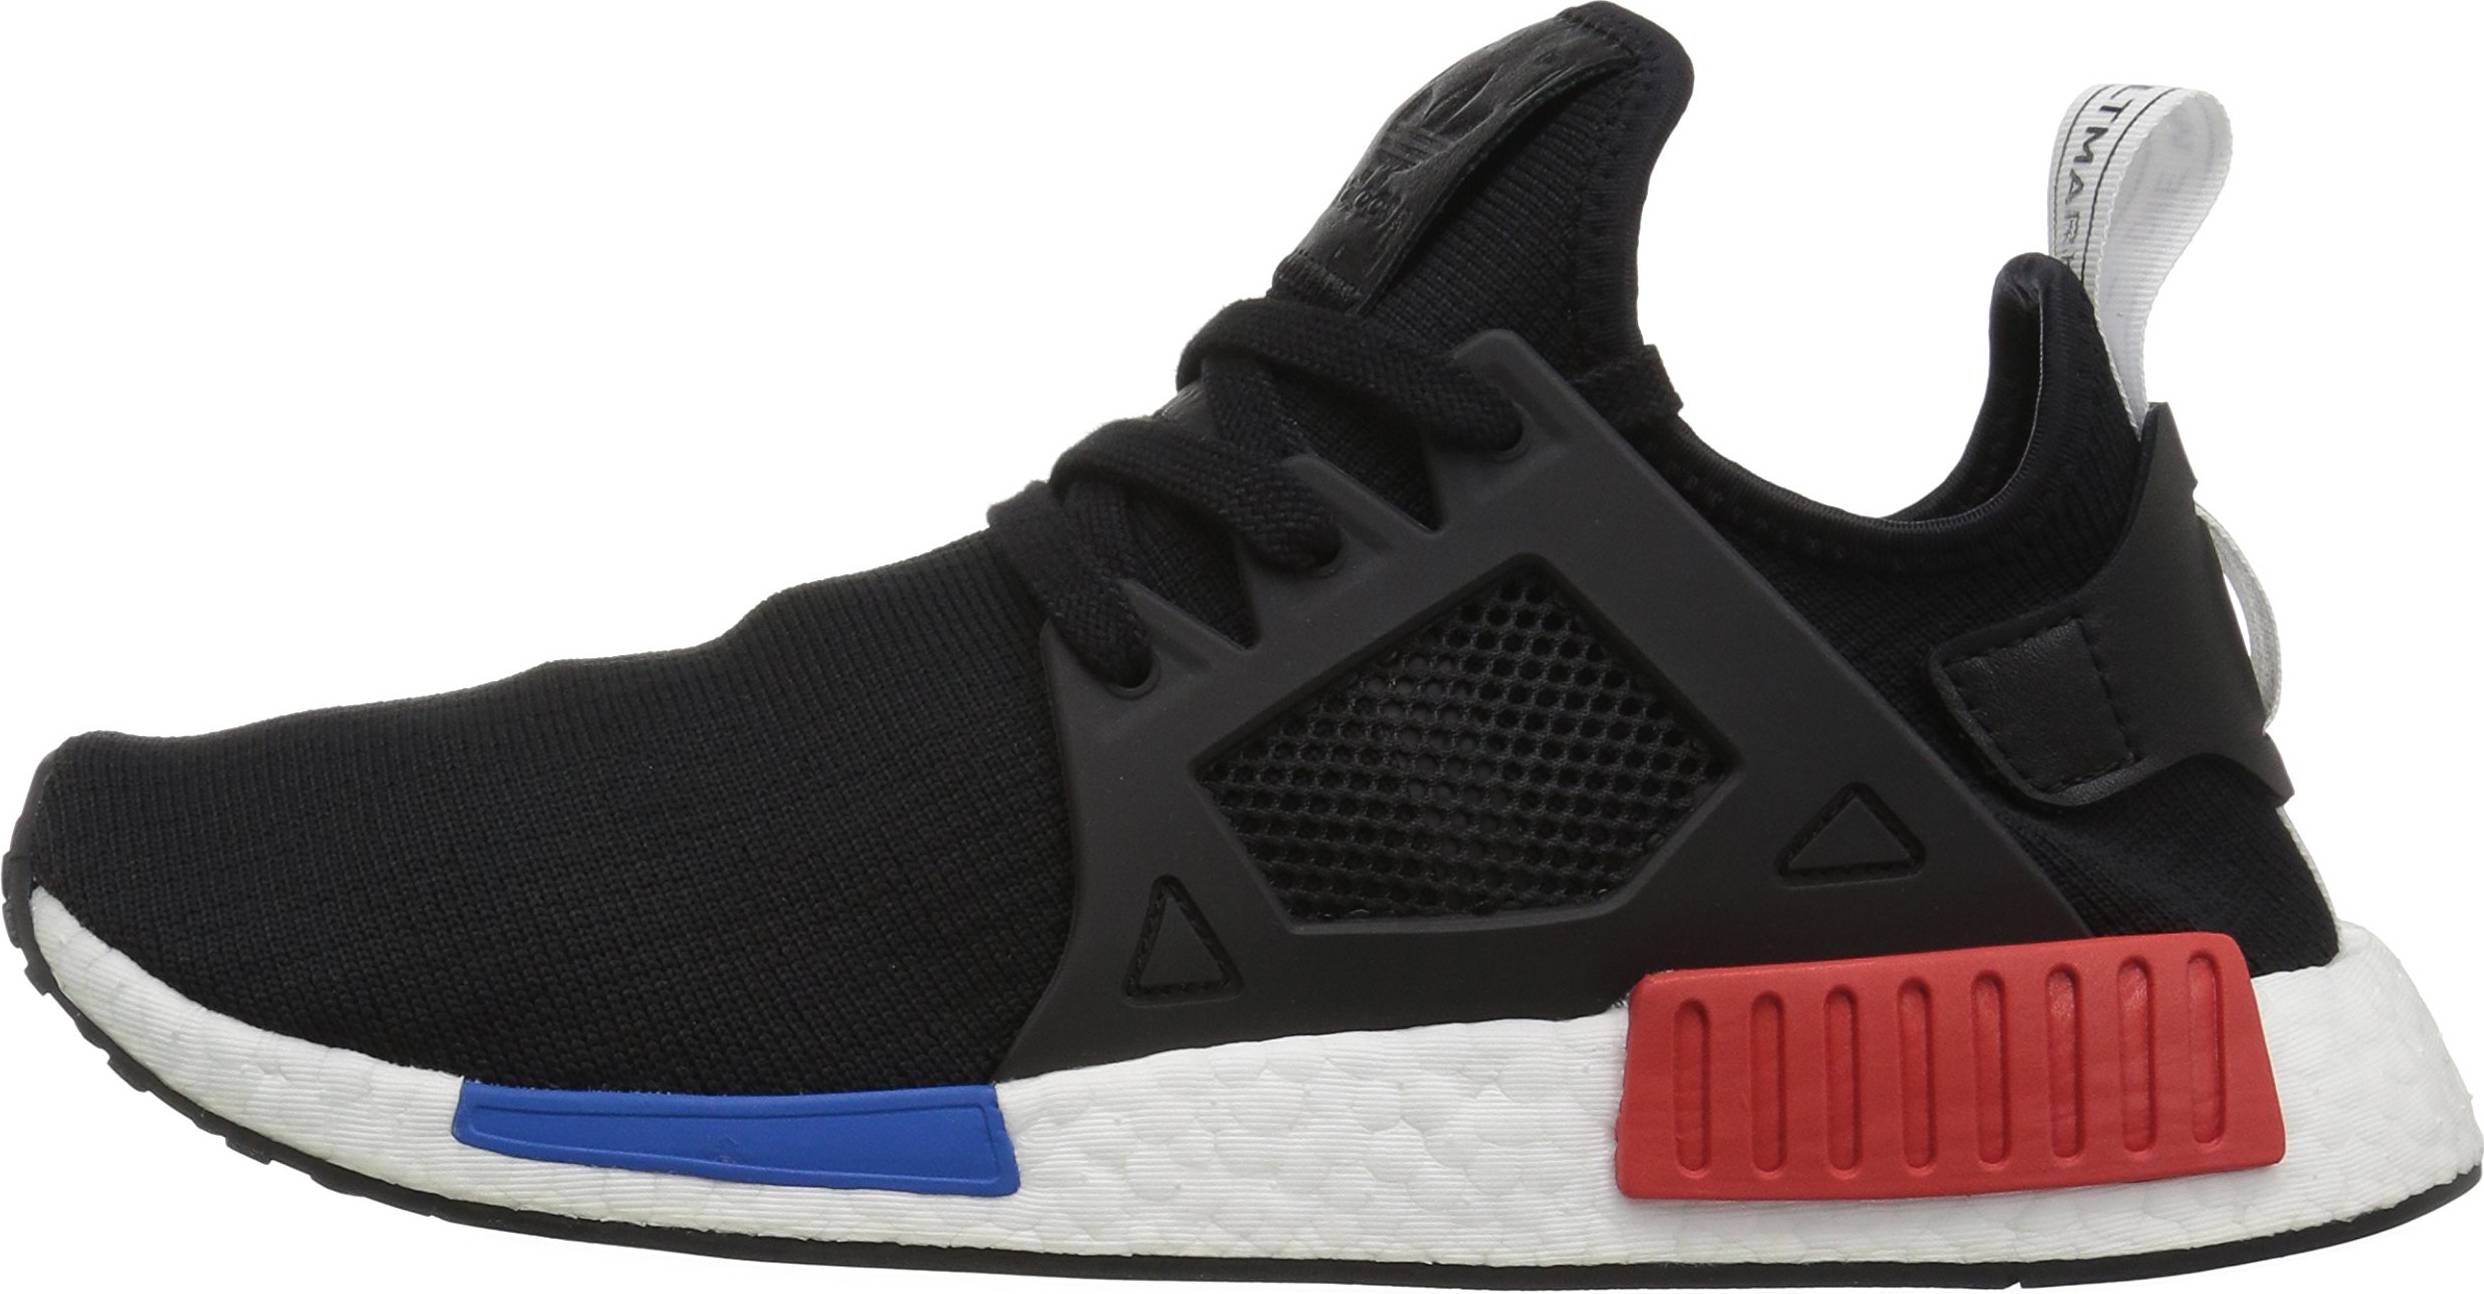 adidas nmd xr1 size guide